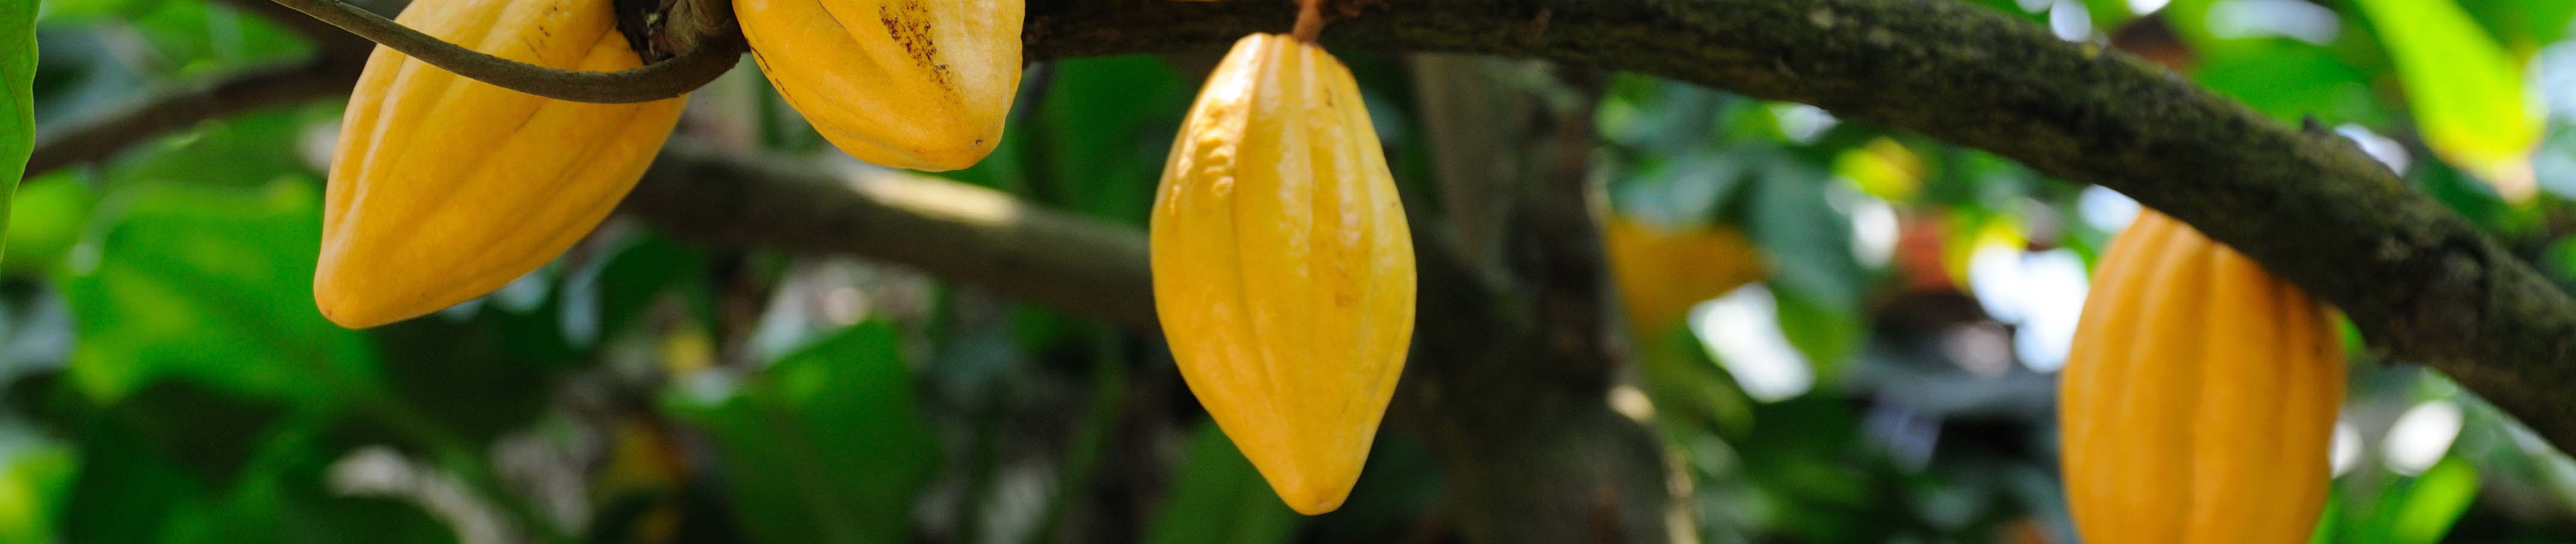 What Is a Cocoa Tree? Meet the Raw Material of Chocolate!